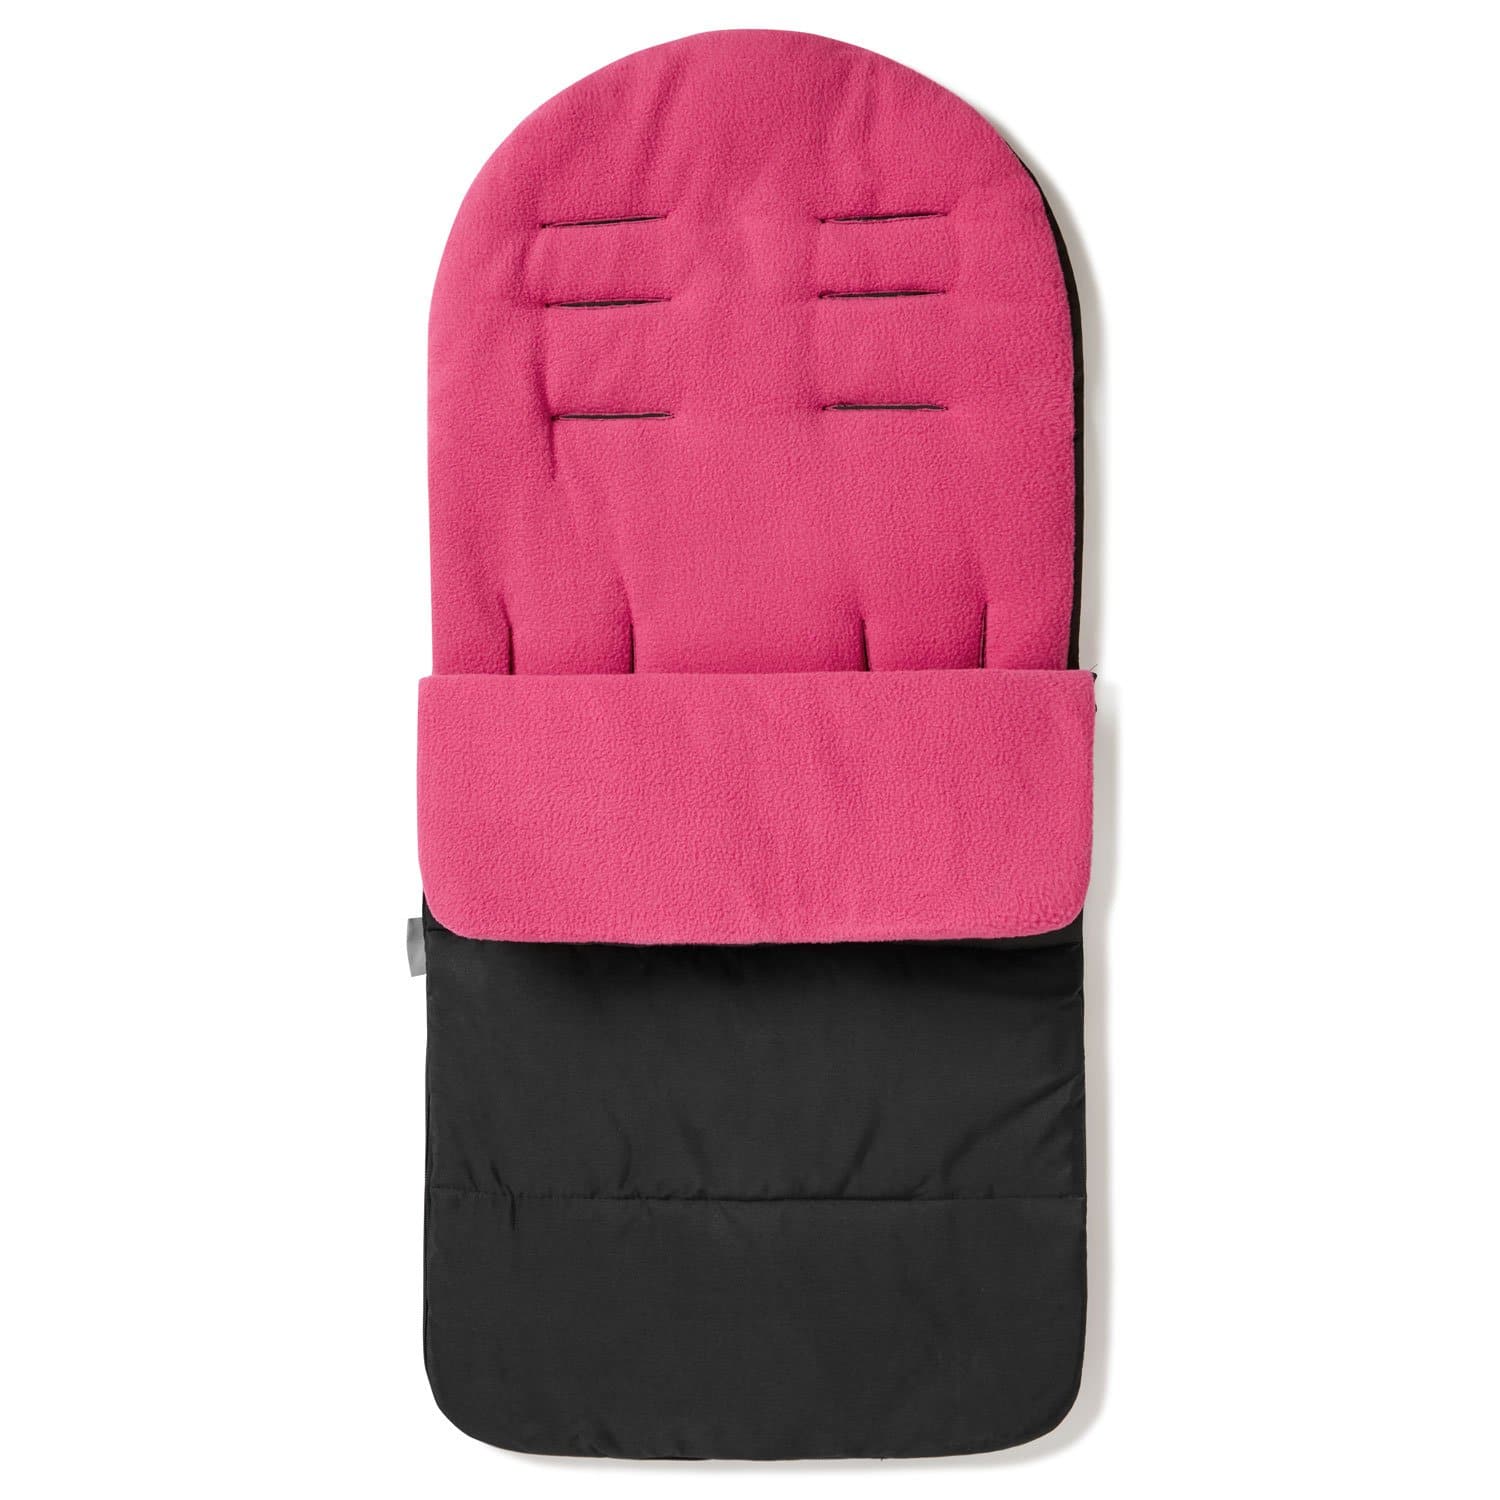 Premium Footmuff / Cosy Toes Compatible with Bloom - Pink Rose / Fits All Models | For Your Little One